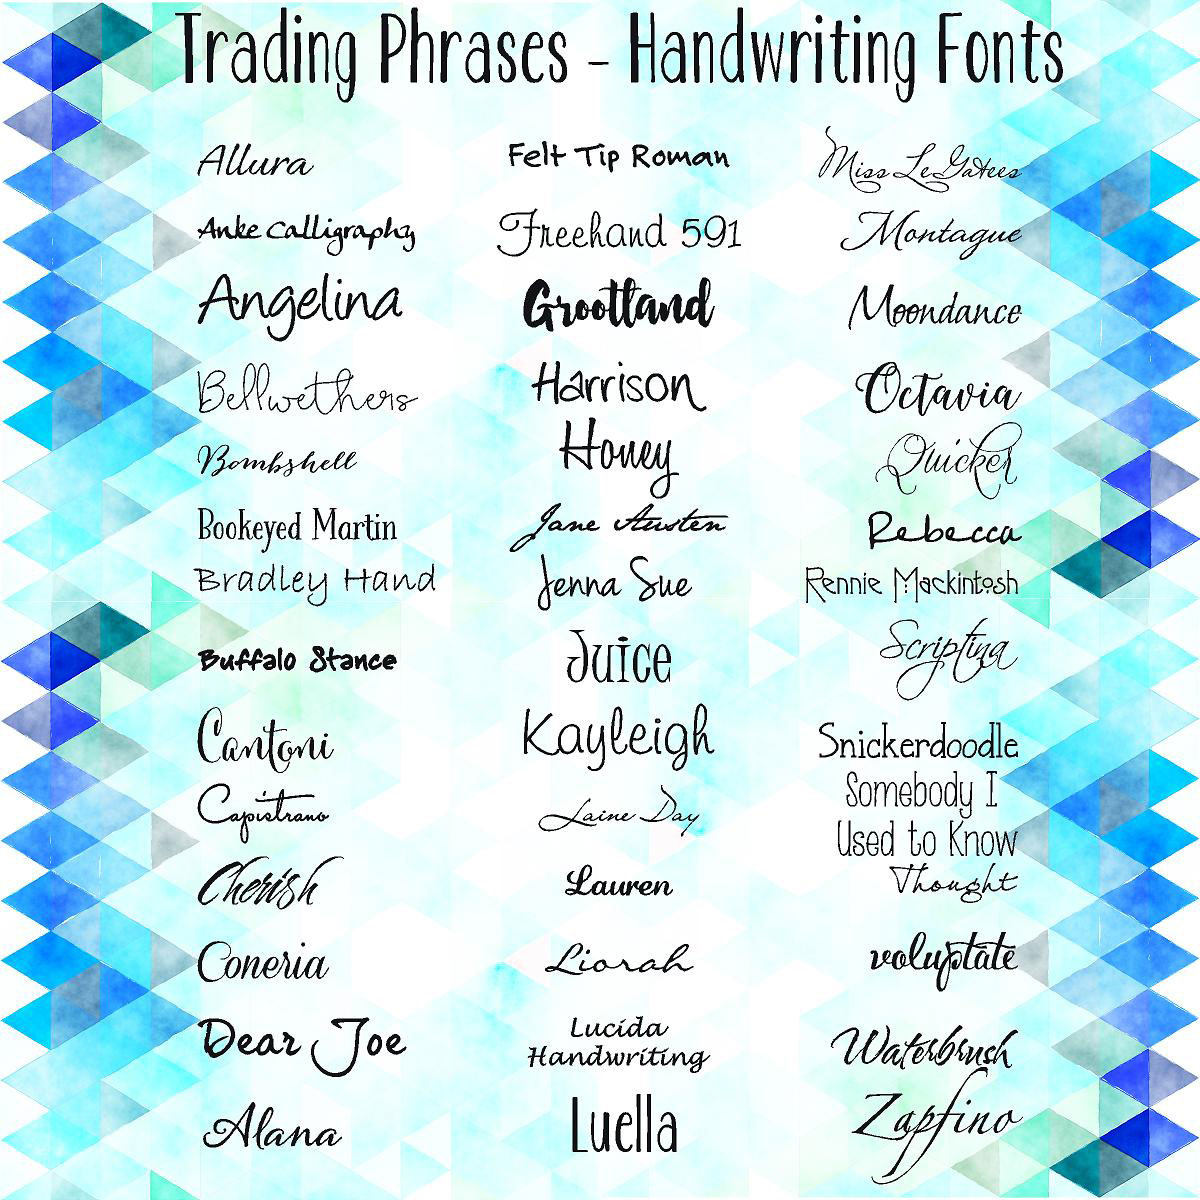 Trading Phrases Handwriting Fonts